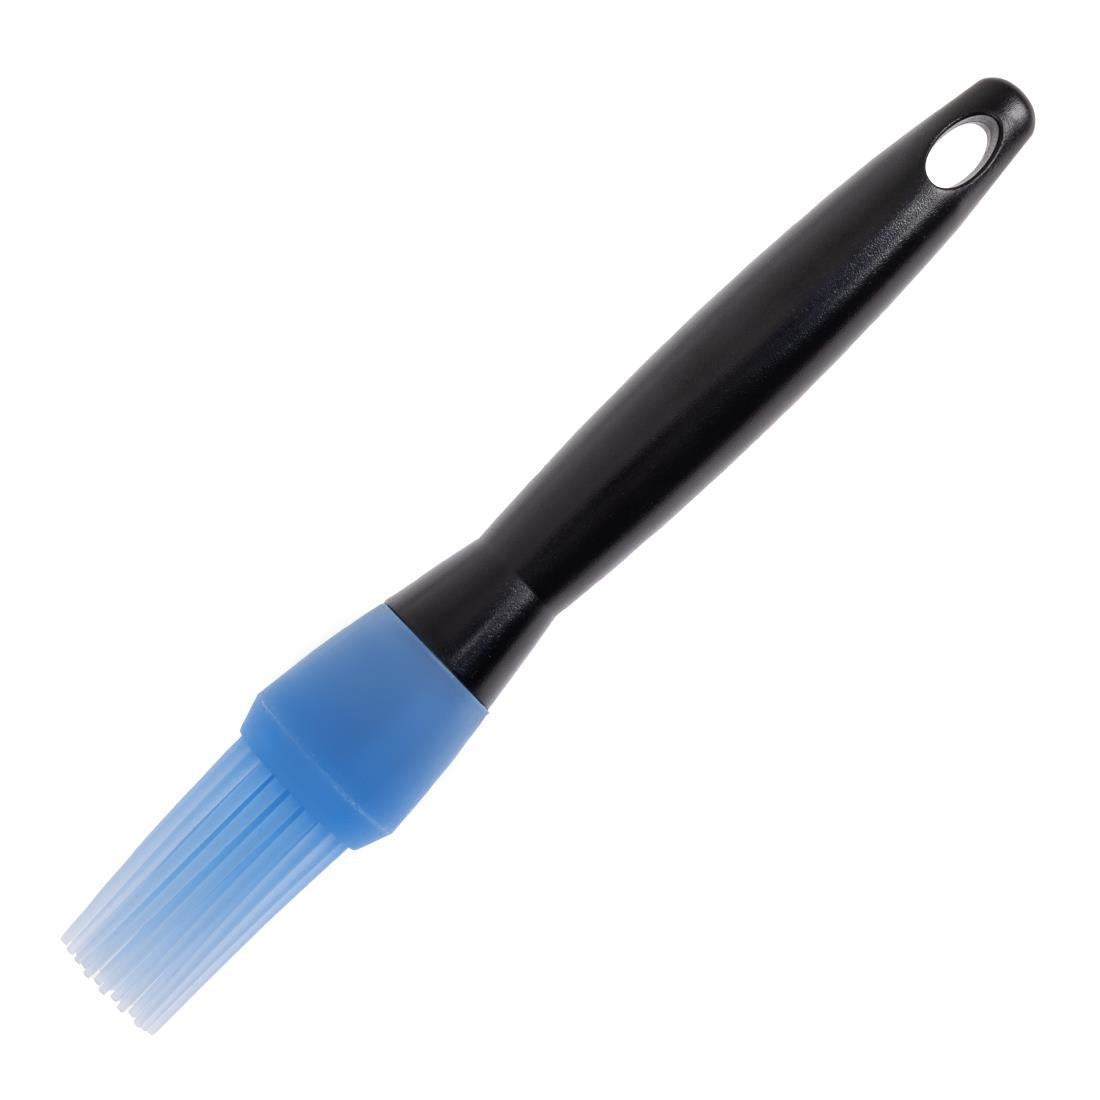 D594 Kitchen Craft Silicone Pastry or Basting Brush 25mm JD Catering Equipment Solutions Ltd